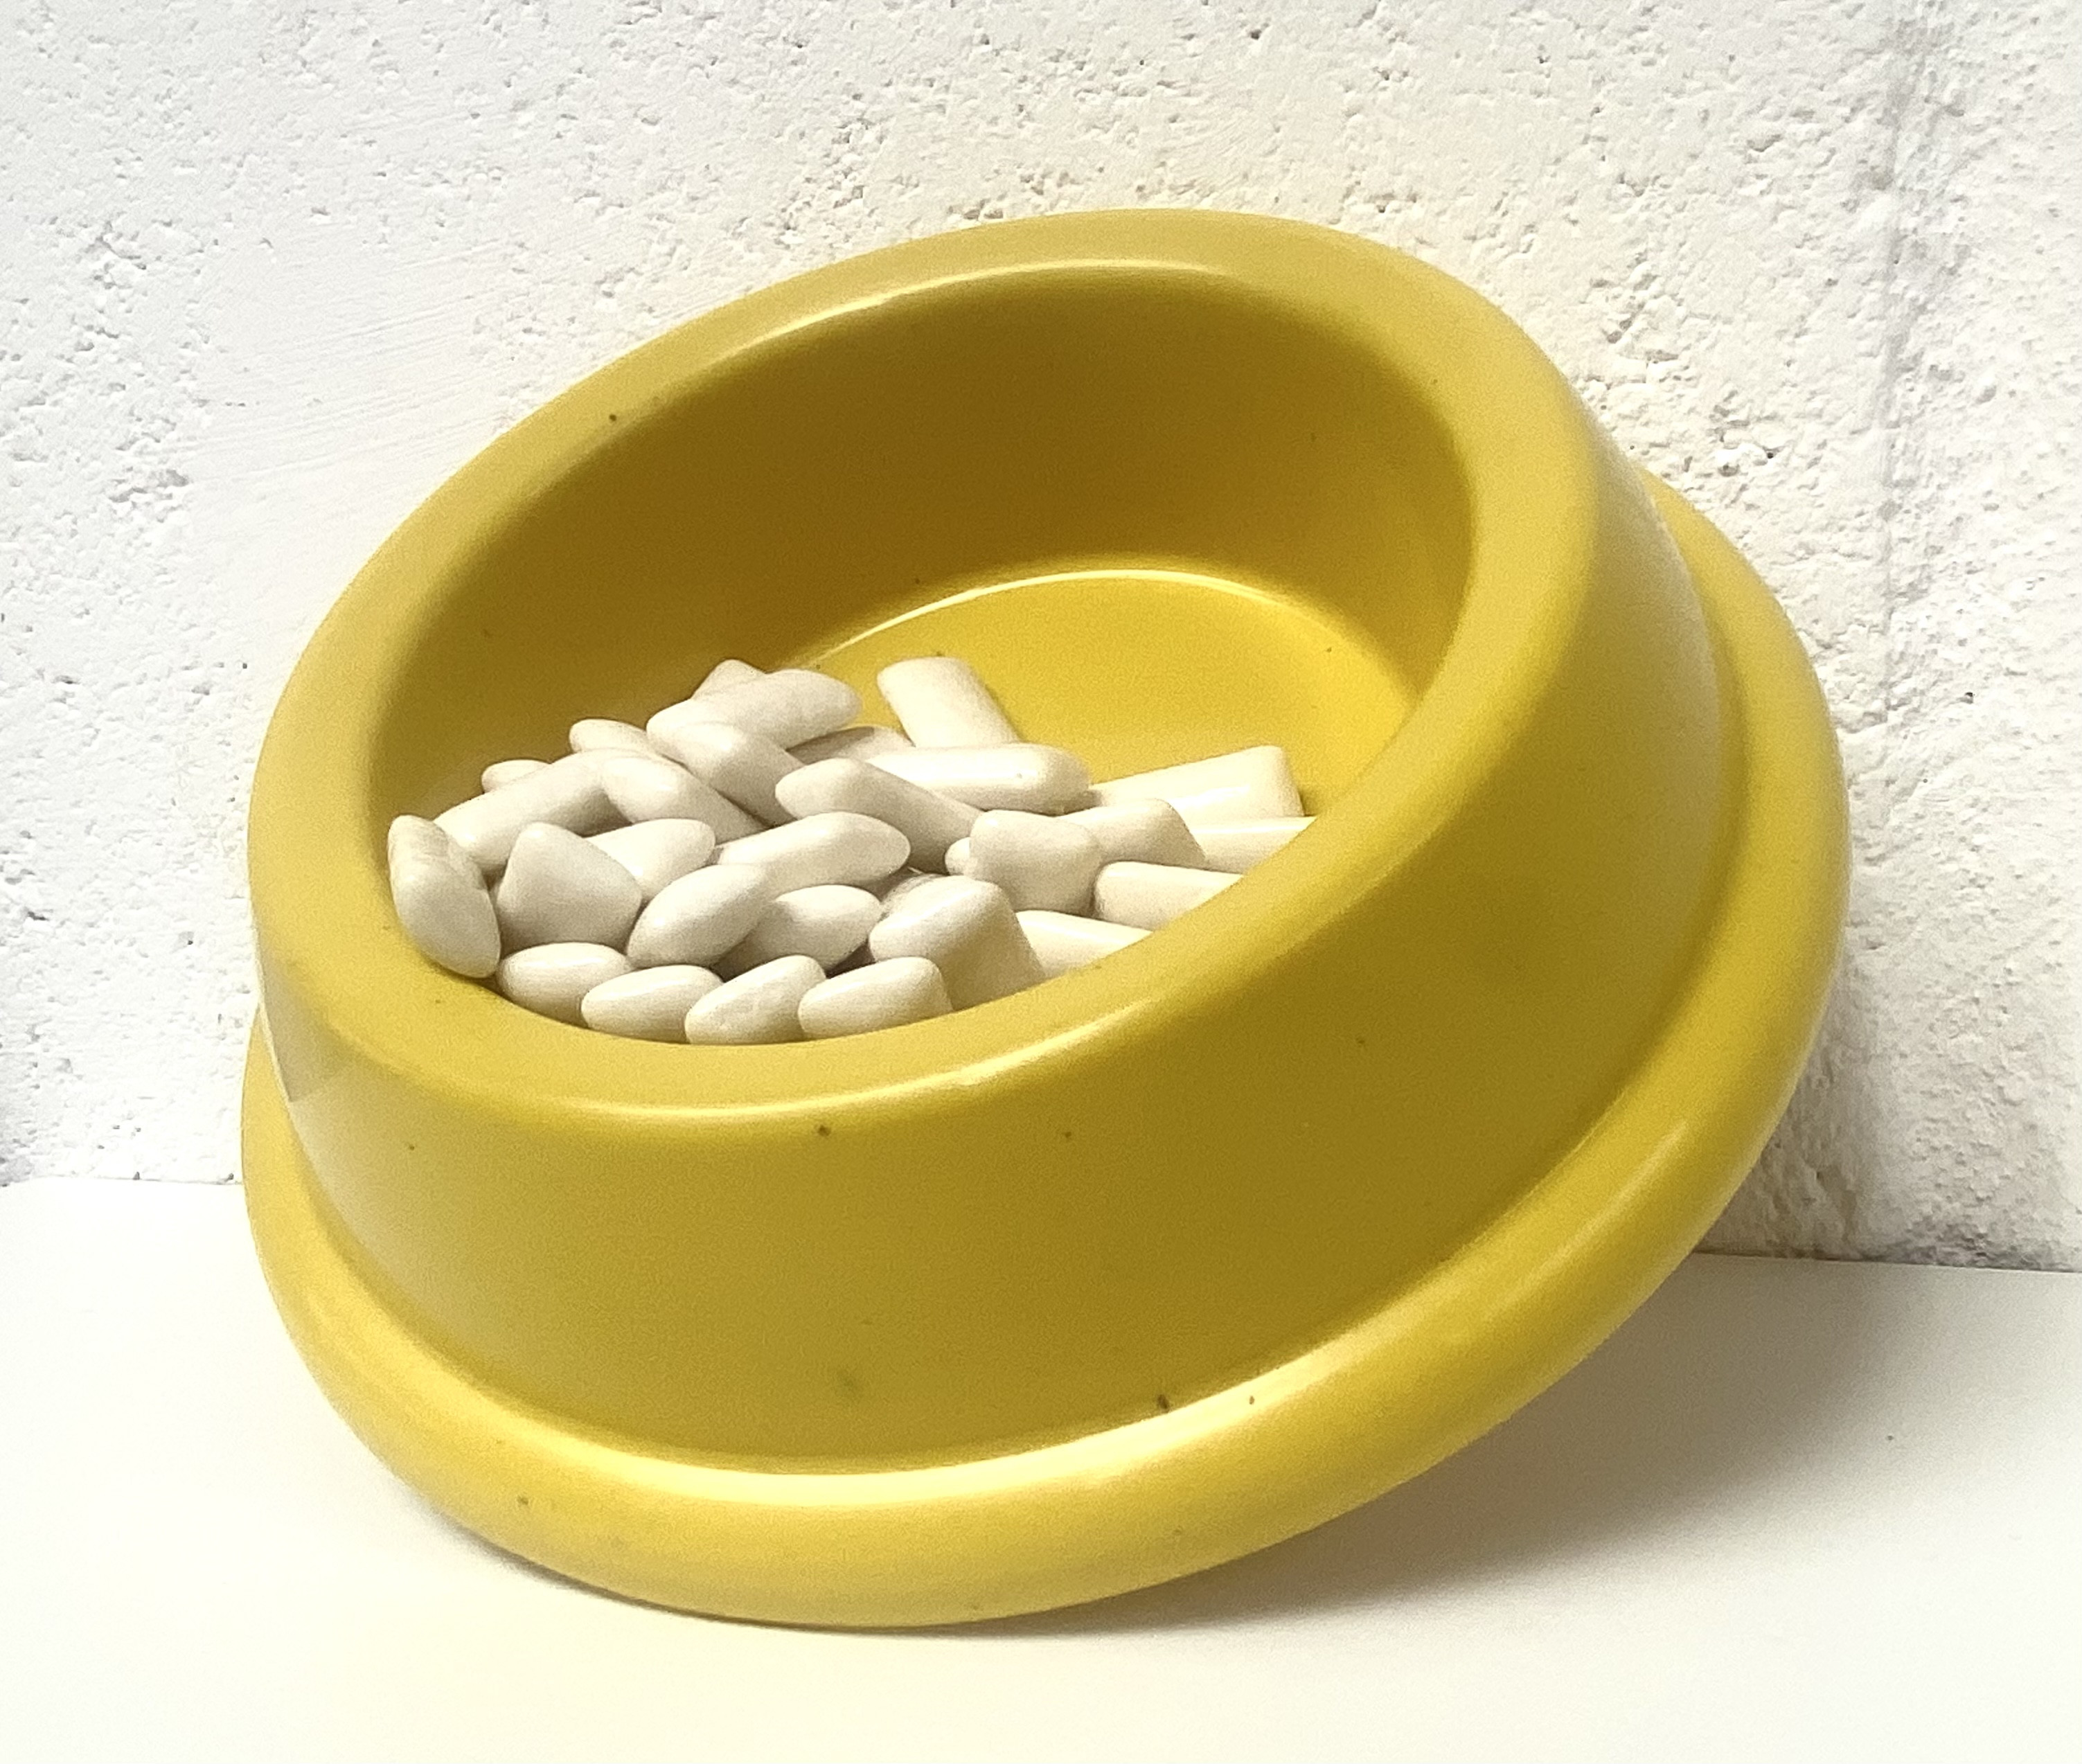 Recycled Chewing Gum Dog Bowl?